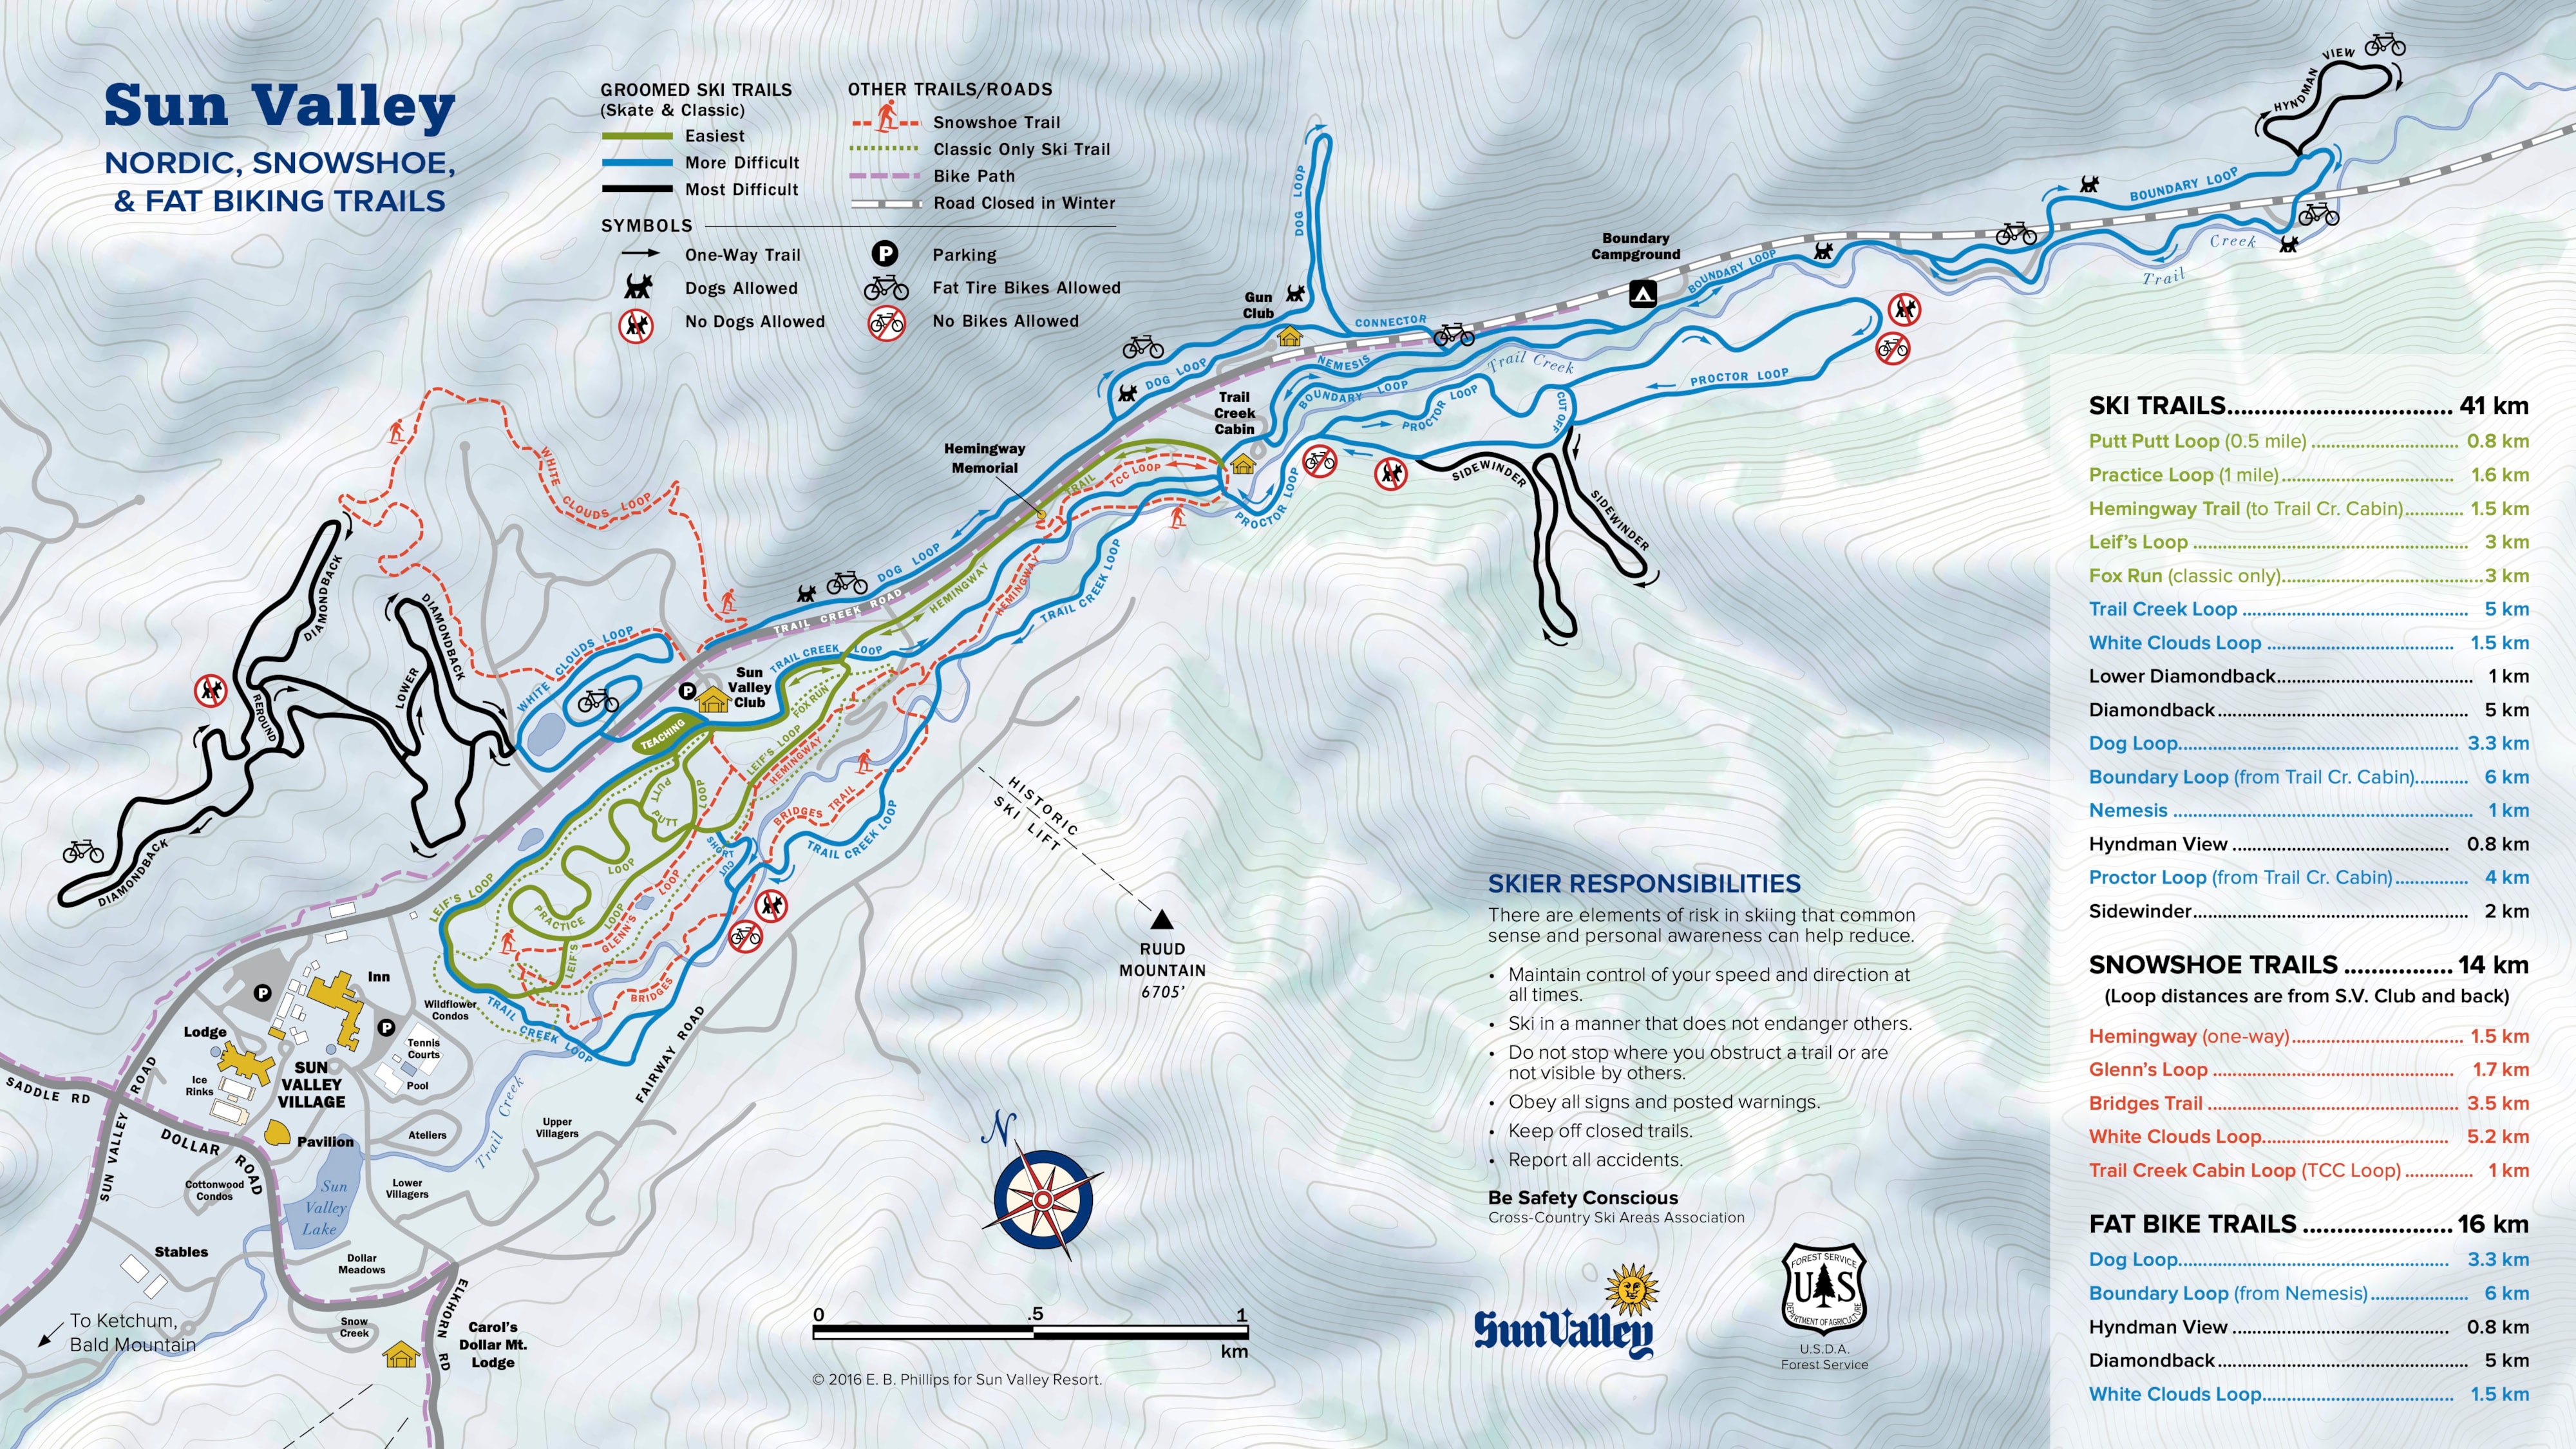 https://www.sunvalley.com/azure/sunvalley/media/sunvalley/maps/winter/sv_nordic_snowshoe_trail_map_web.jpg?w=4000&mode=crop&scale=both